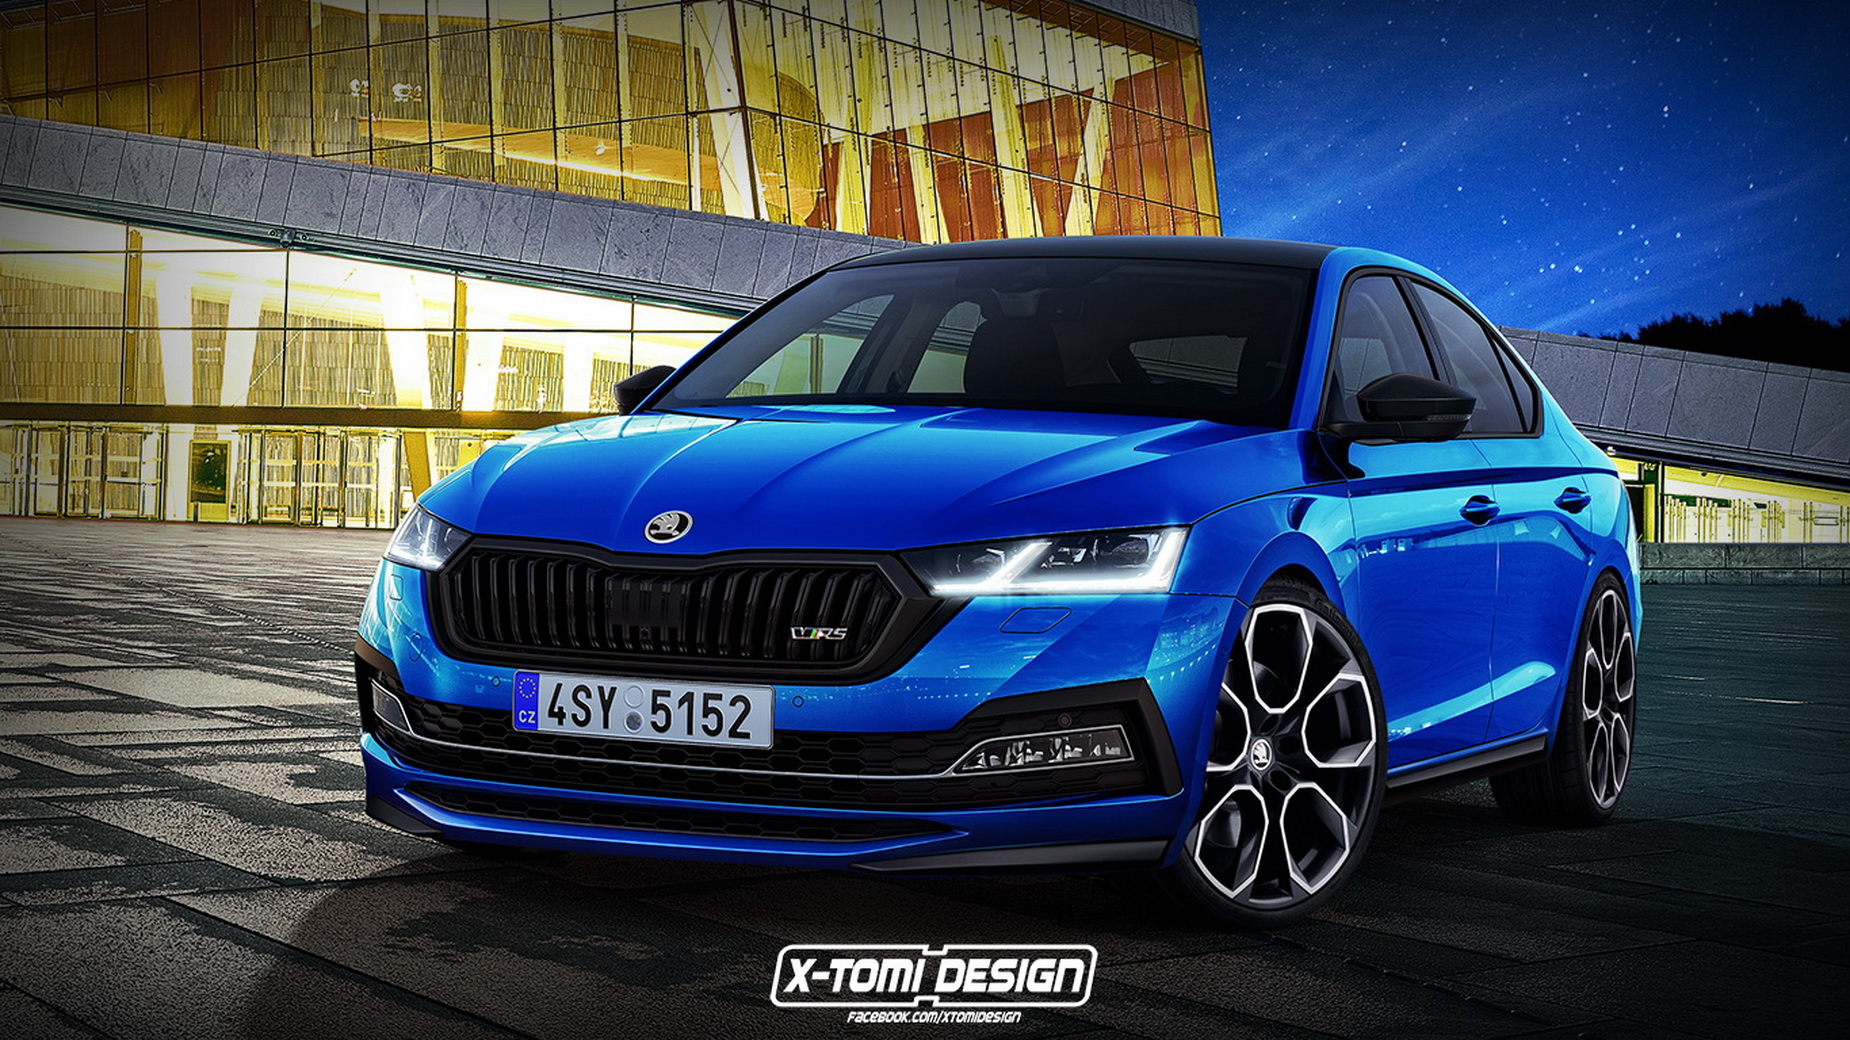 2020 Skoda Octavia RS To Follow Cupra Leon's Footsteps And Get A